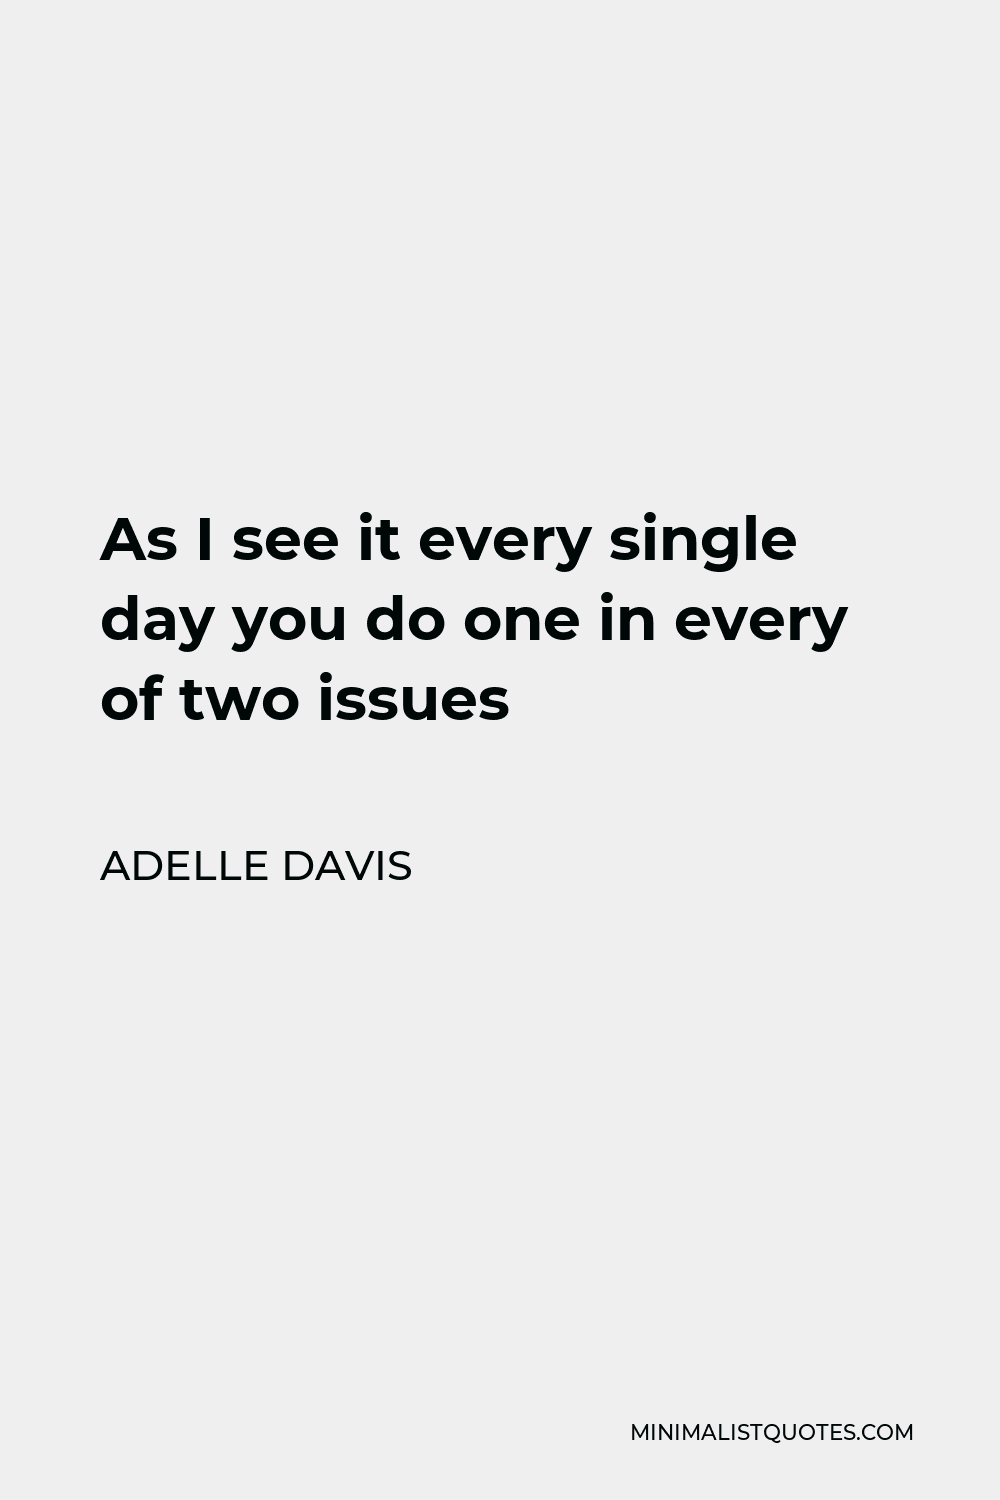 Adelle Davis Quote - As I see it every single day you do one in every of two issues